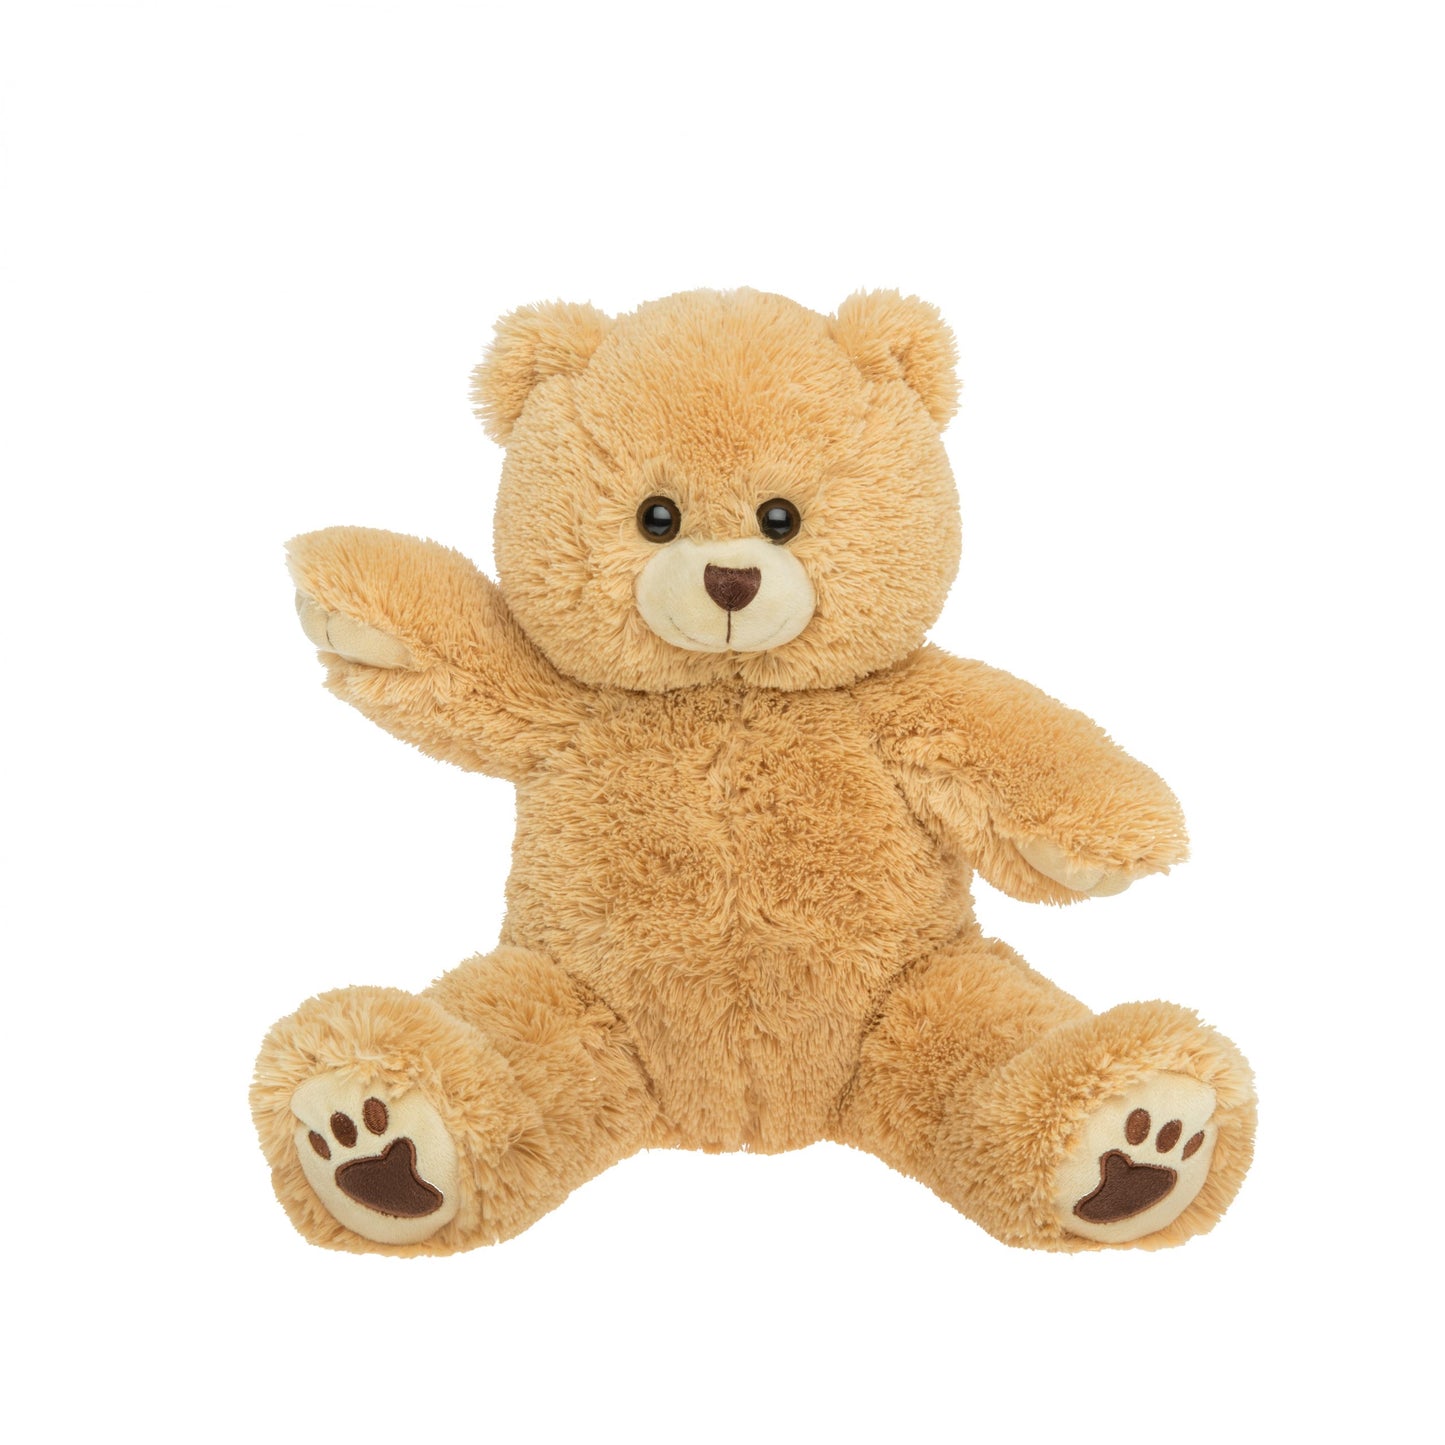 Baby Bump Gift - Recordable Teddy Bear for best wishes or Ultrasound heartbeat